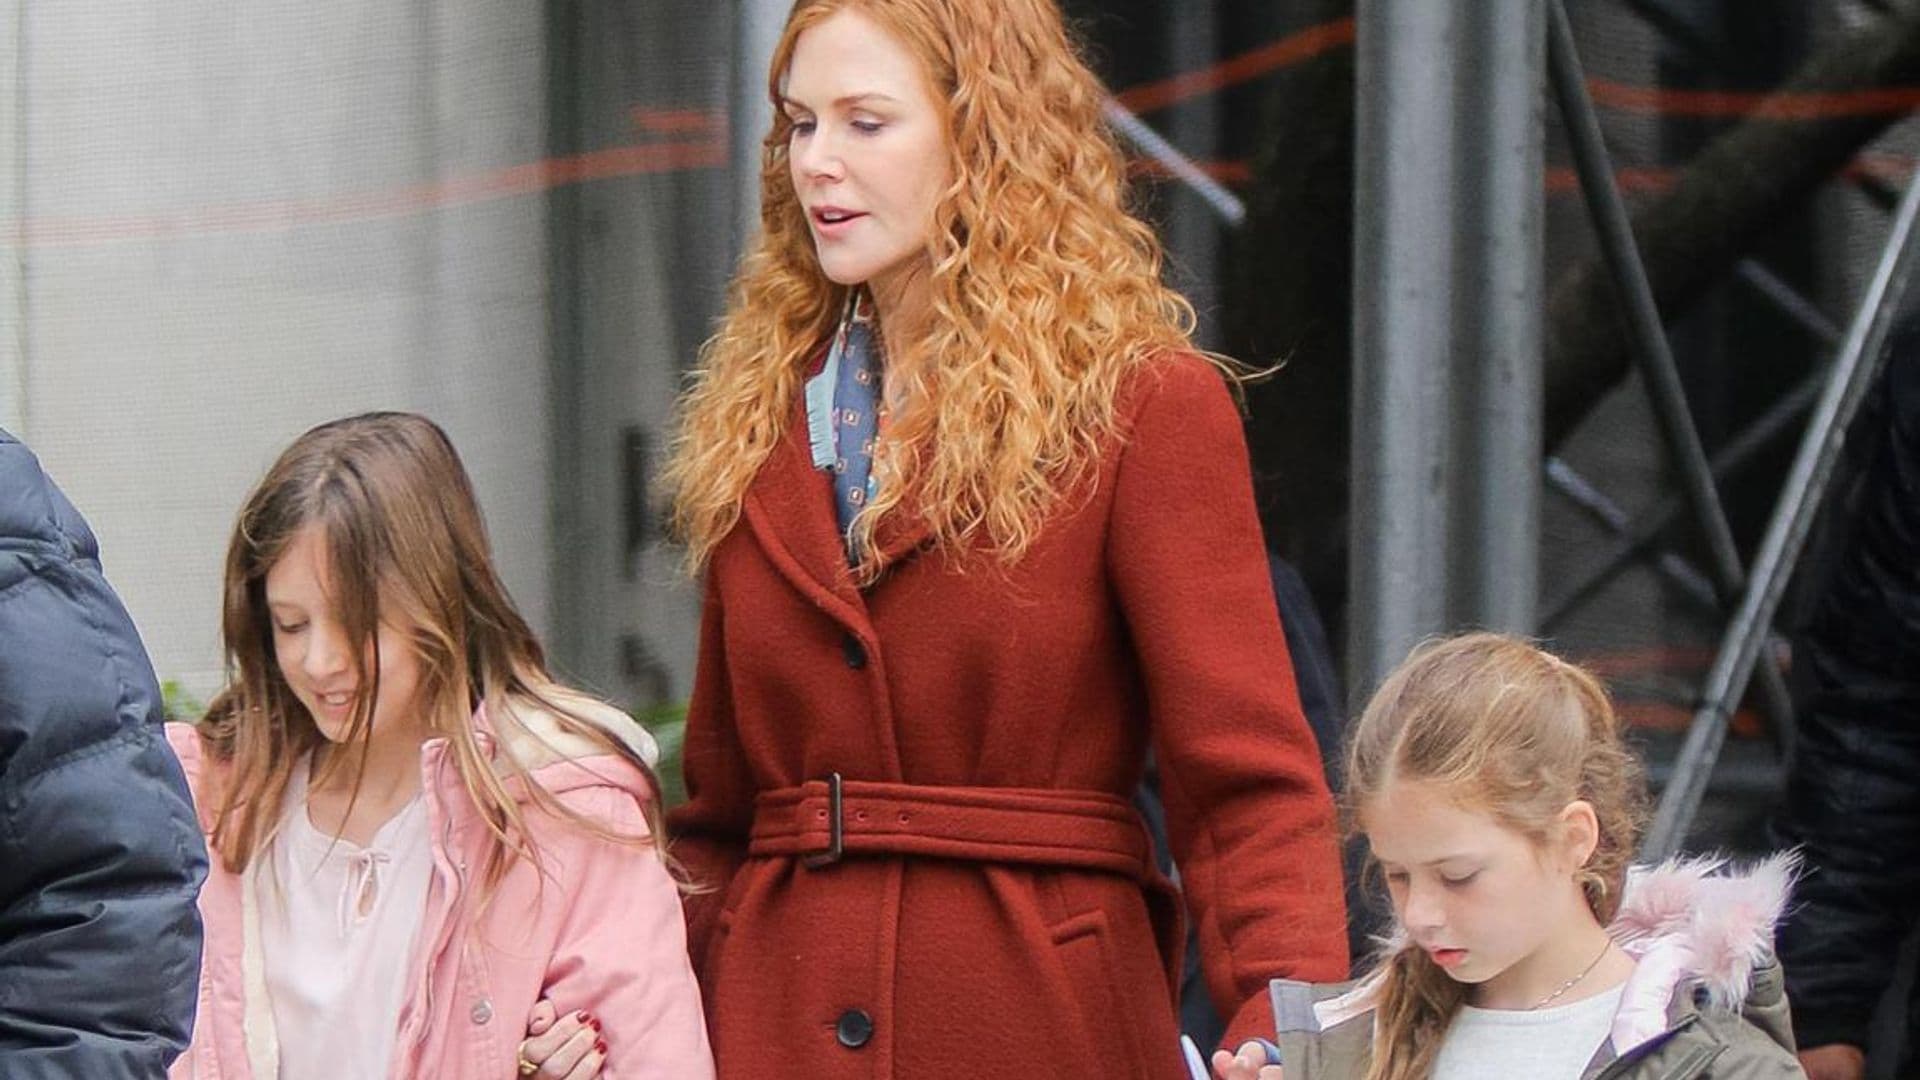 Nicole Kidman struggles to keep her daughters away from tabloids